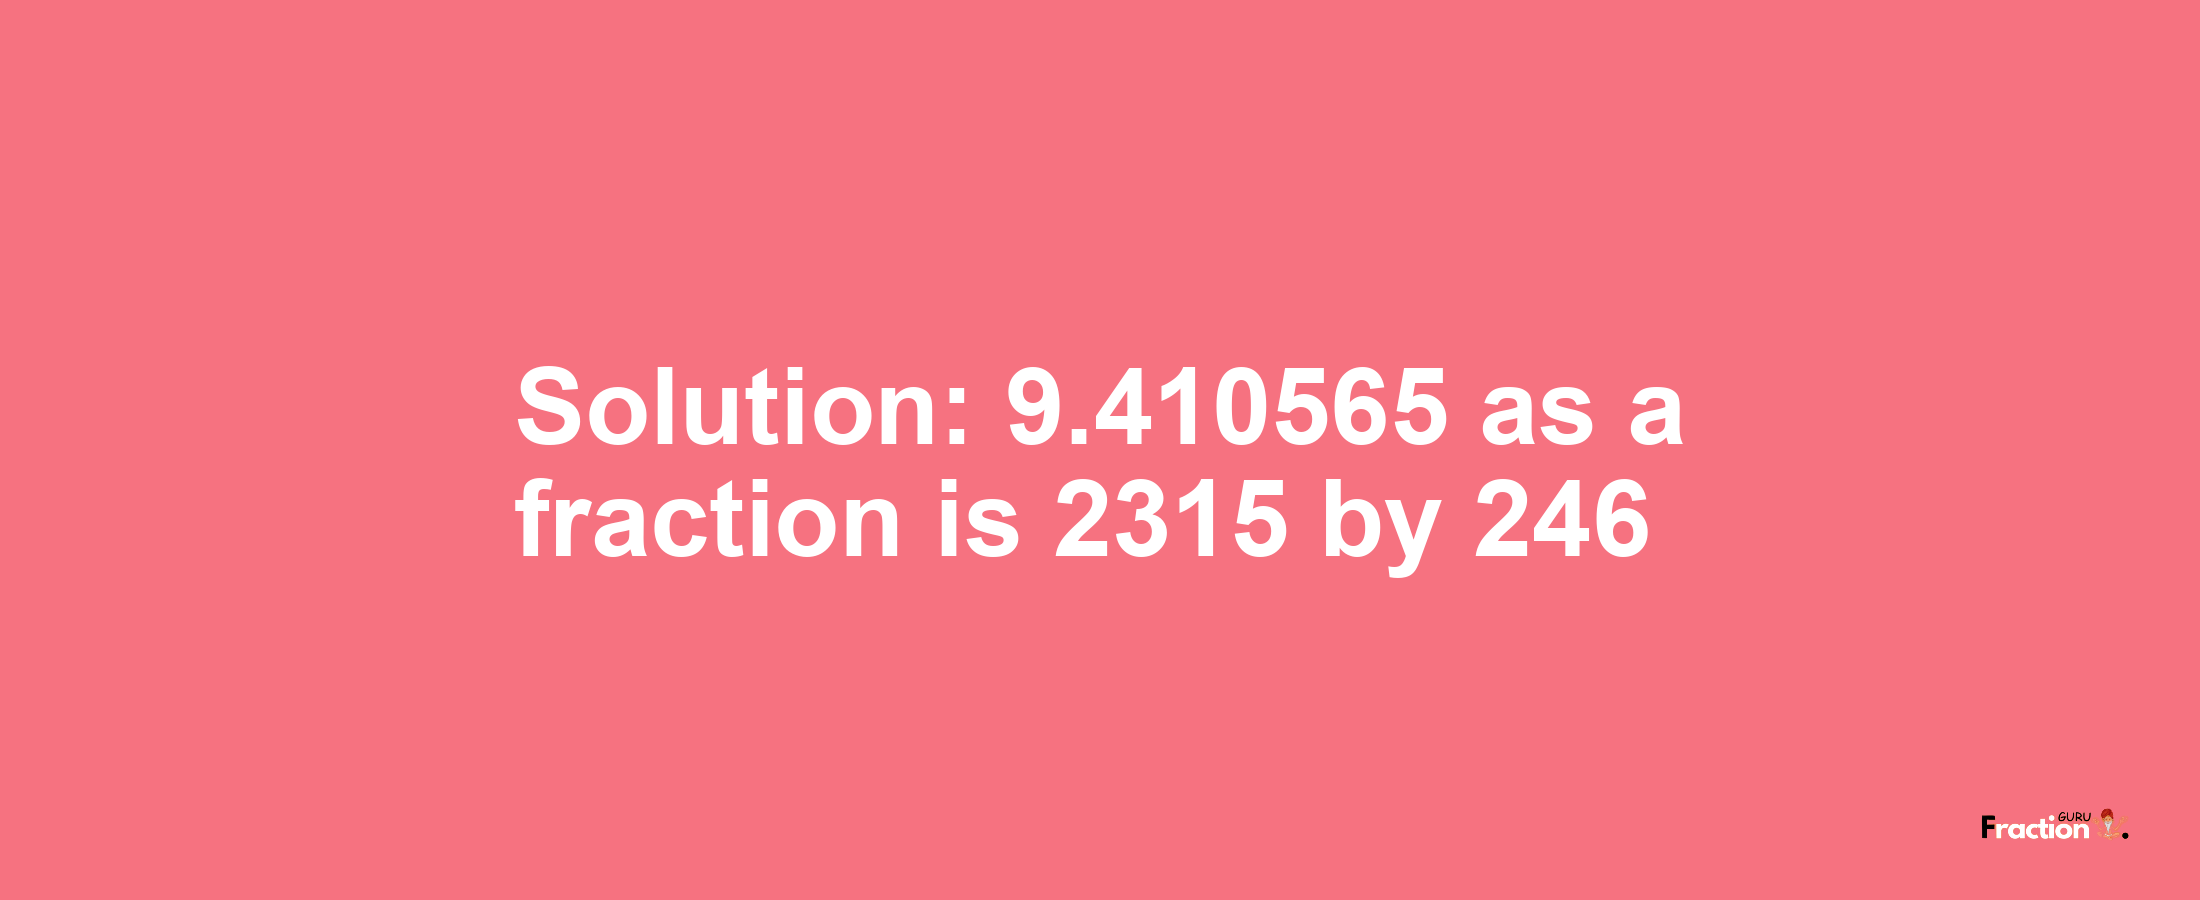 Solution:9.410565 as a fraction is 2315/246